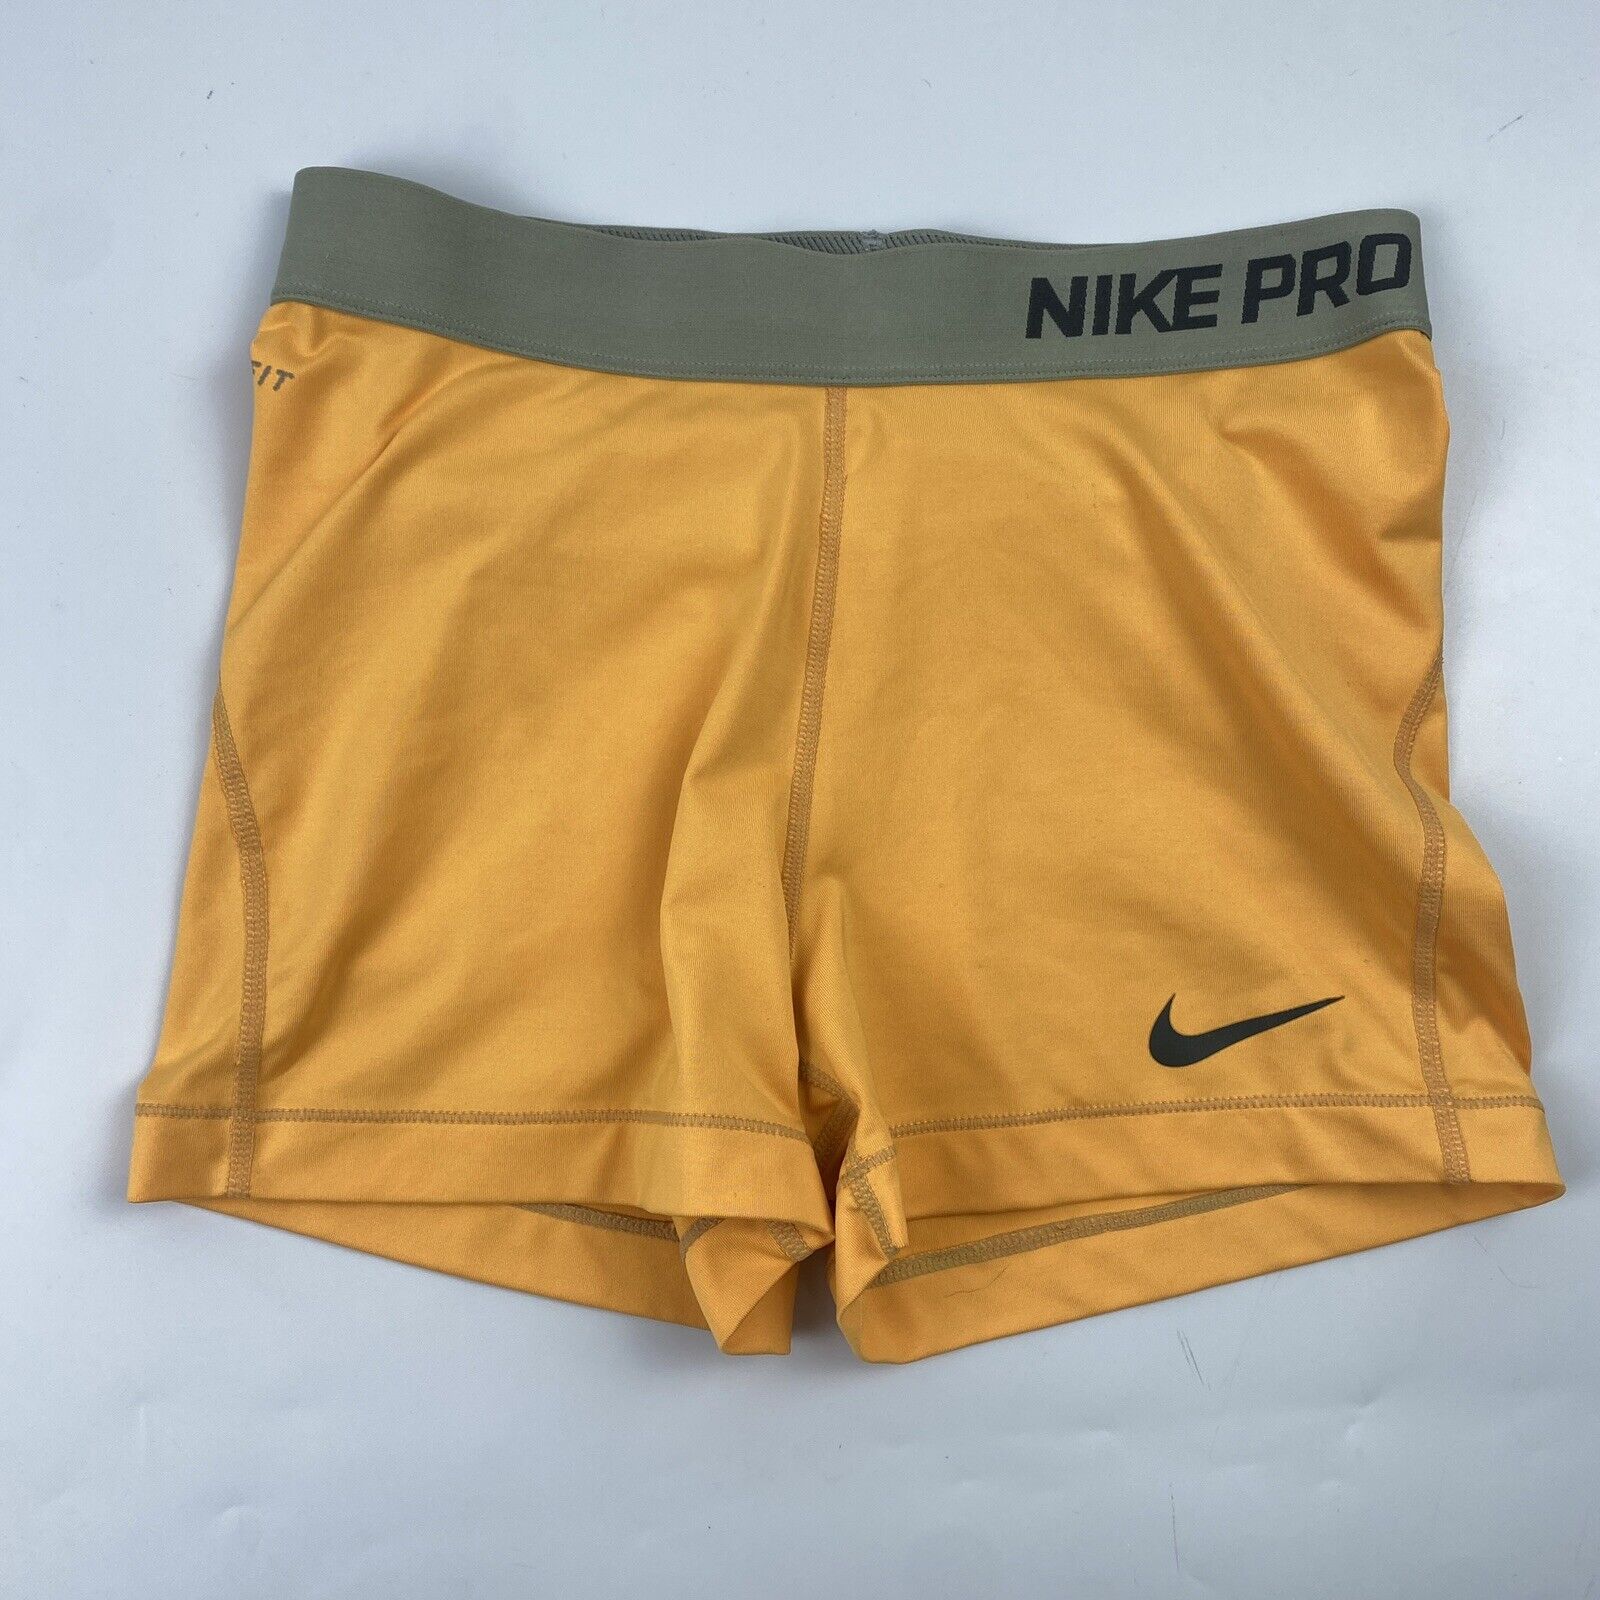 Nike Pro Women's Orange Compression Manufacturer regenerated product S Shorts Inventory cleanup selling sale Athletic Gym Active